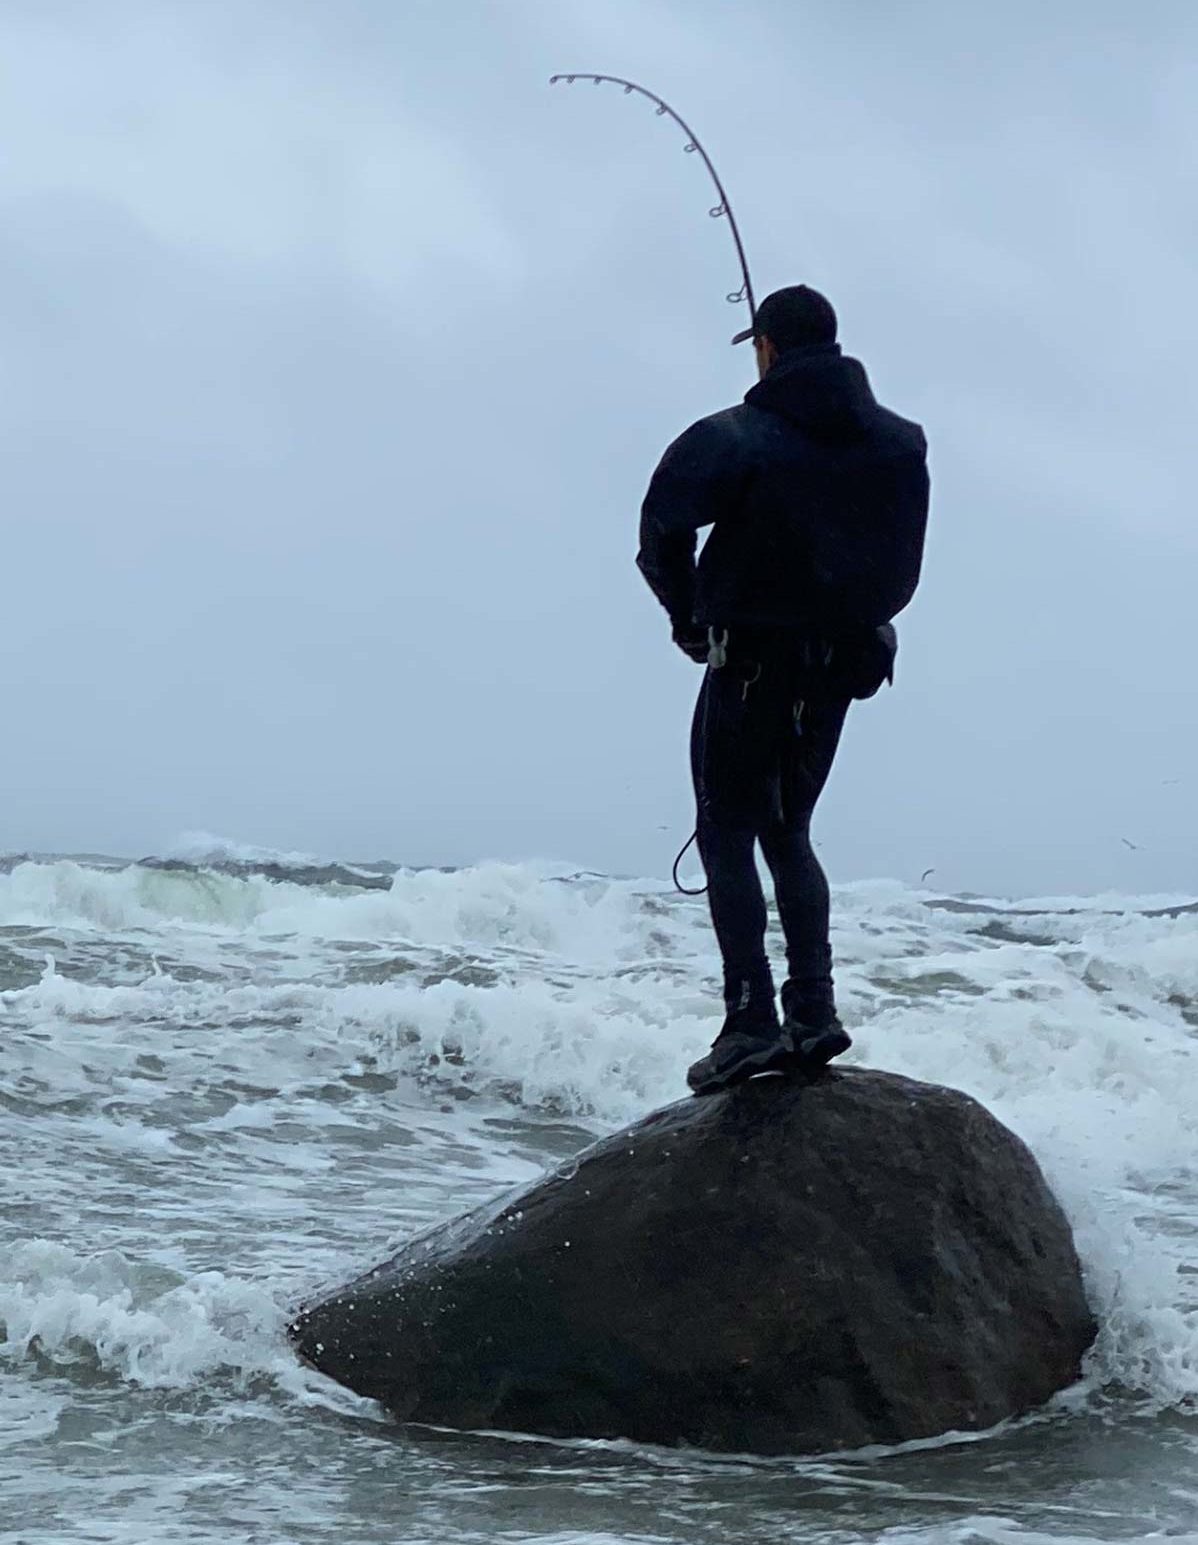 Surf: On Your Feet - The Fisherman